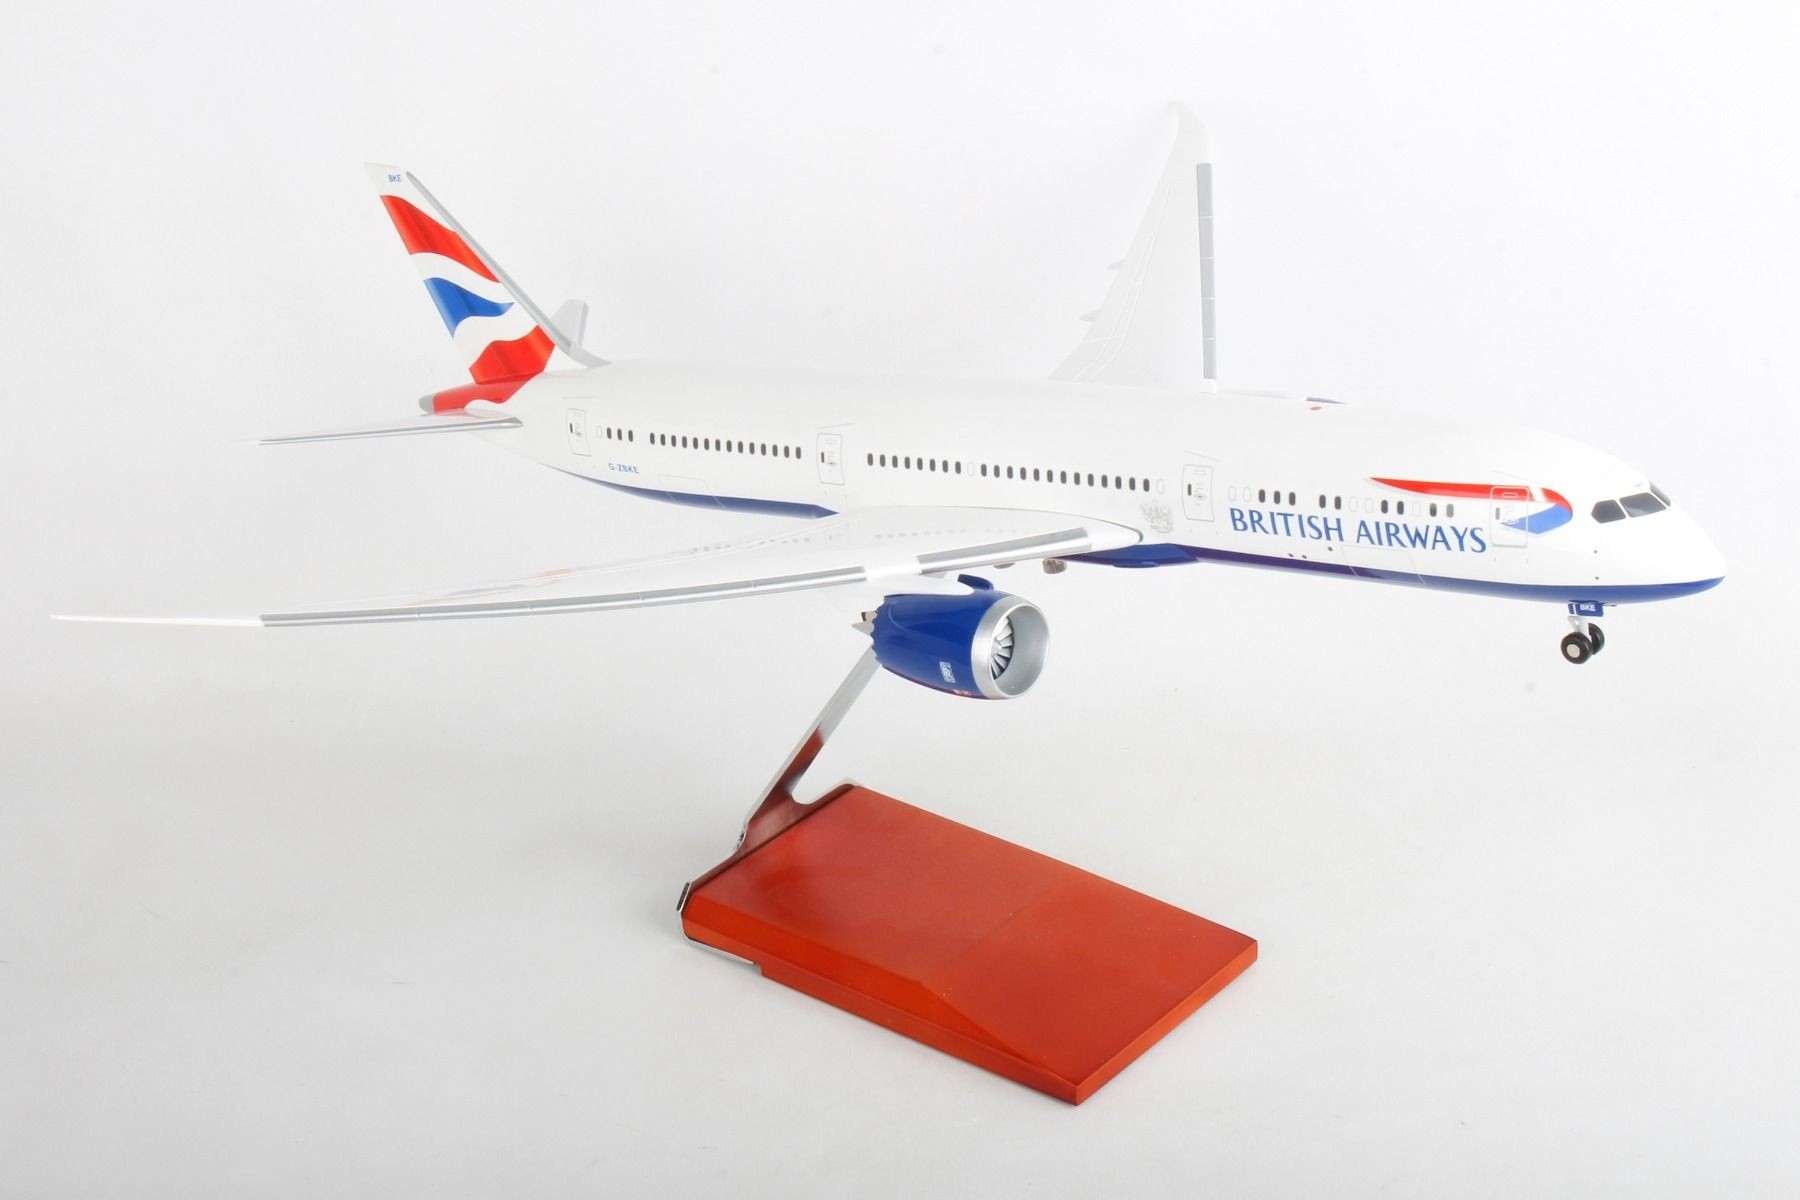 OUTLET 包装 即日発送 代引無料 【超激レア】BOEING787-9 DREAM LINER 1/100 通販 